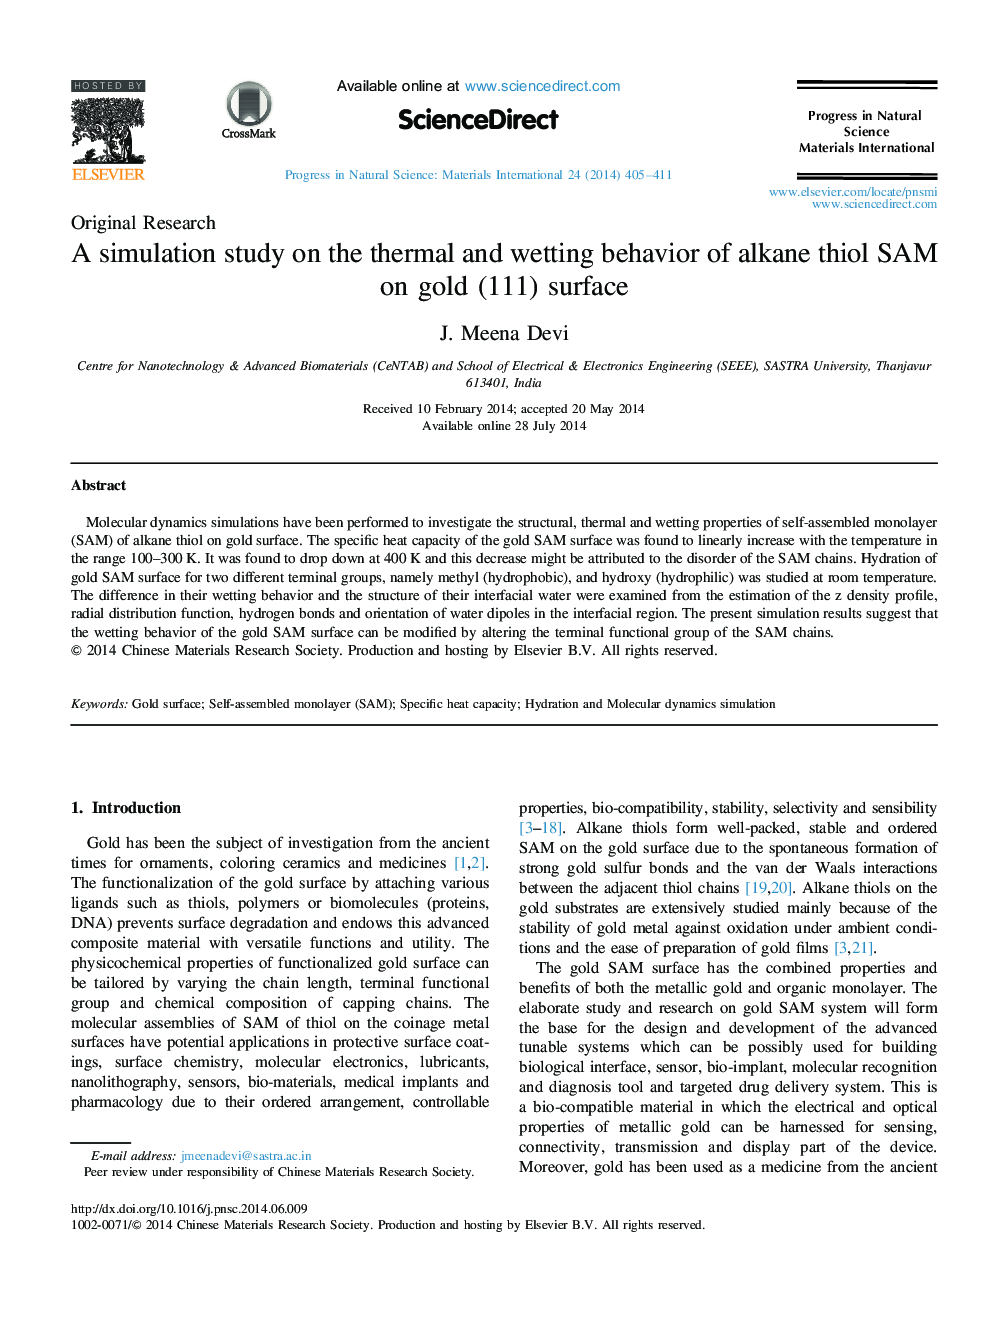 A simulation study on the thermal and wetting behavior of alkane thiol SAM on gold (111) surface 